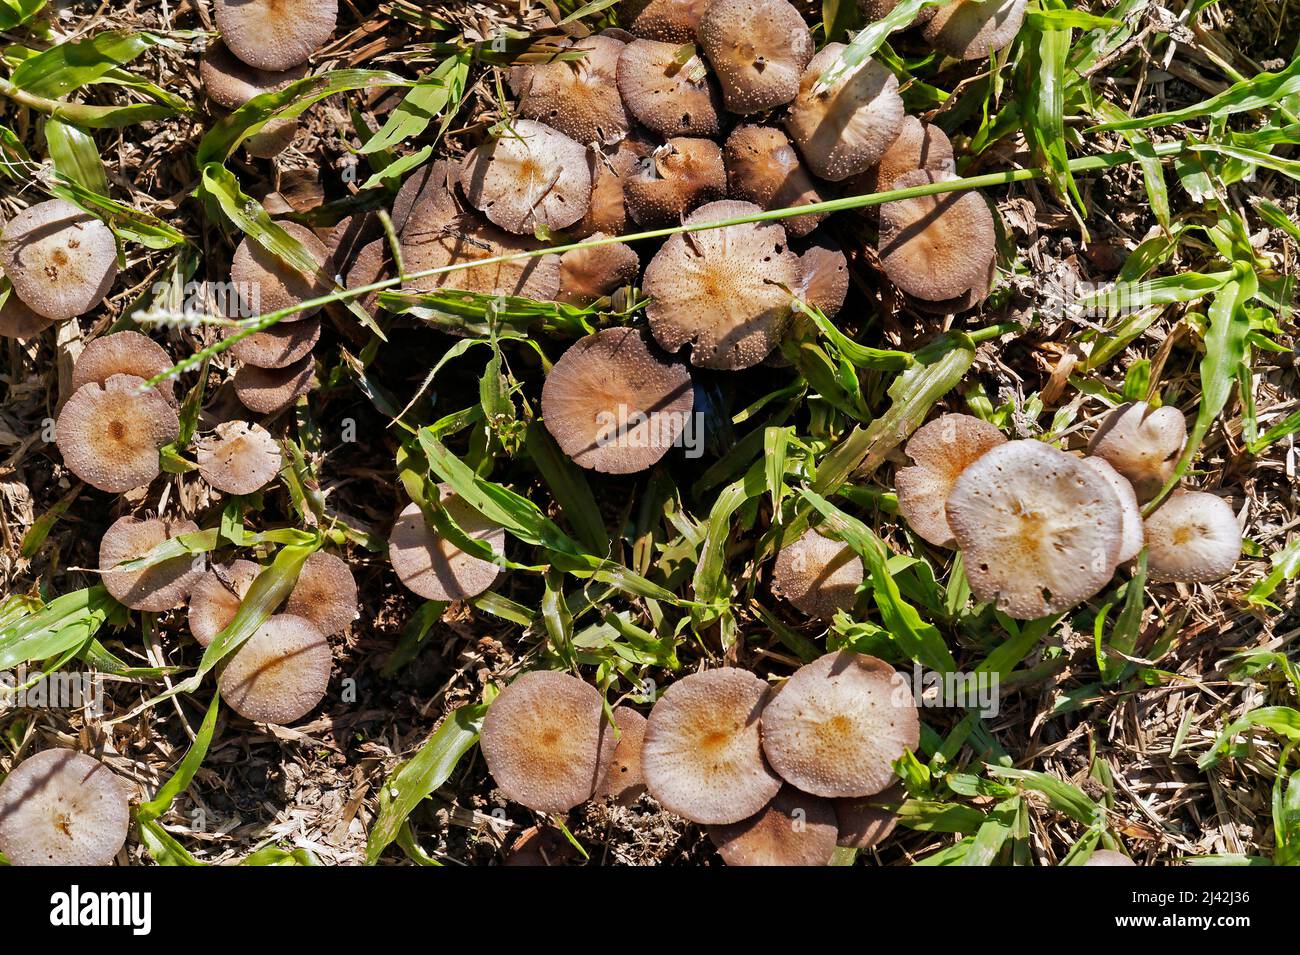 Mushrooms on grass in tropical rainforest Stock Photo